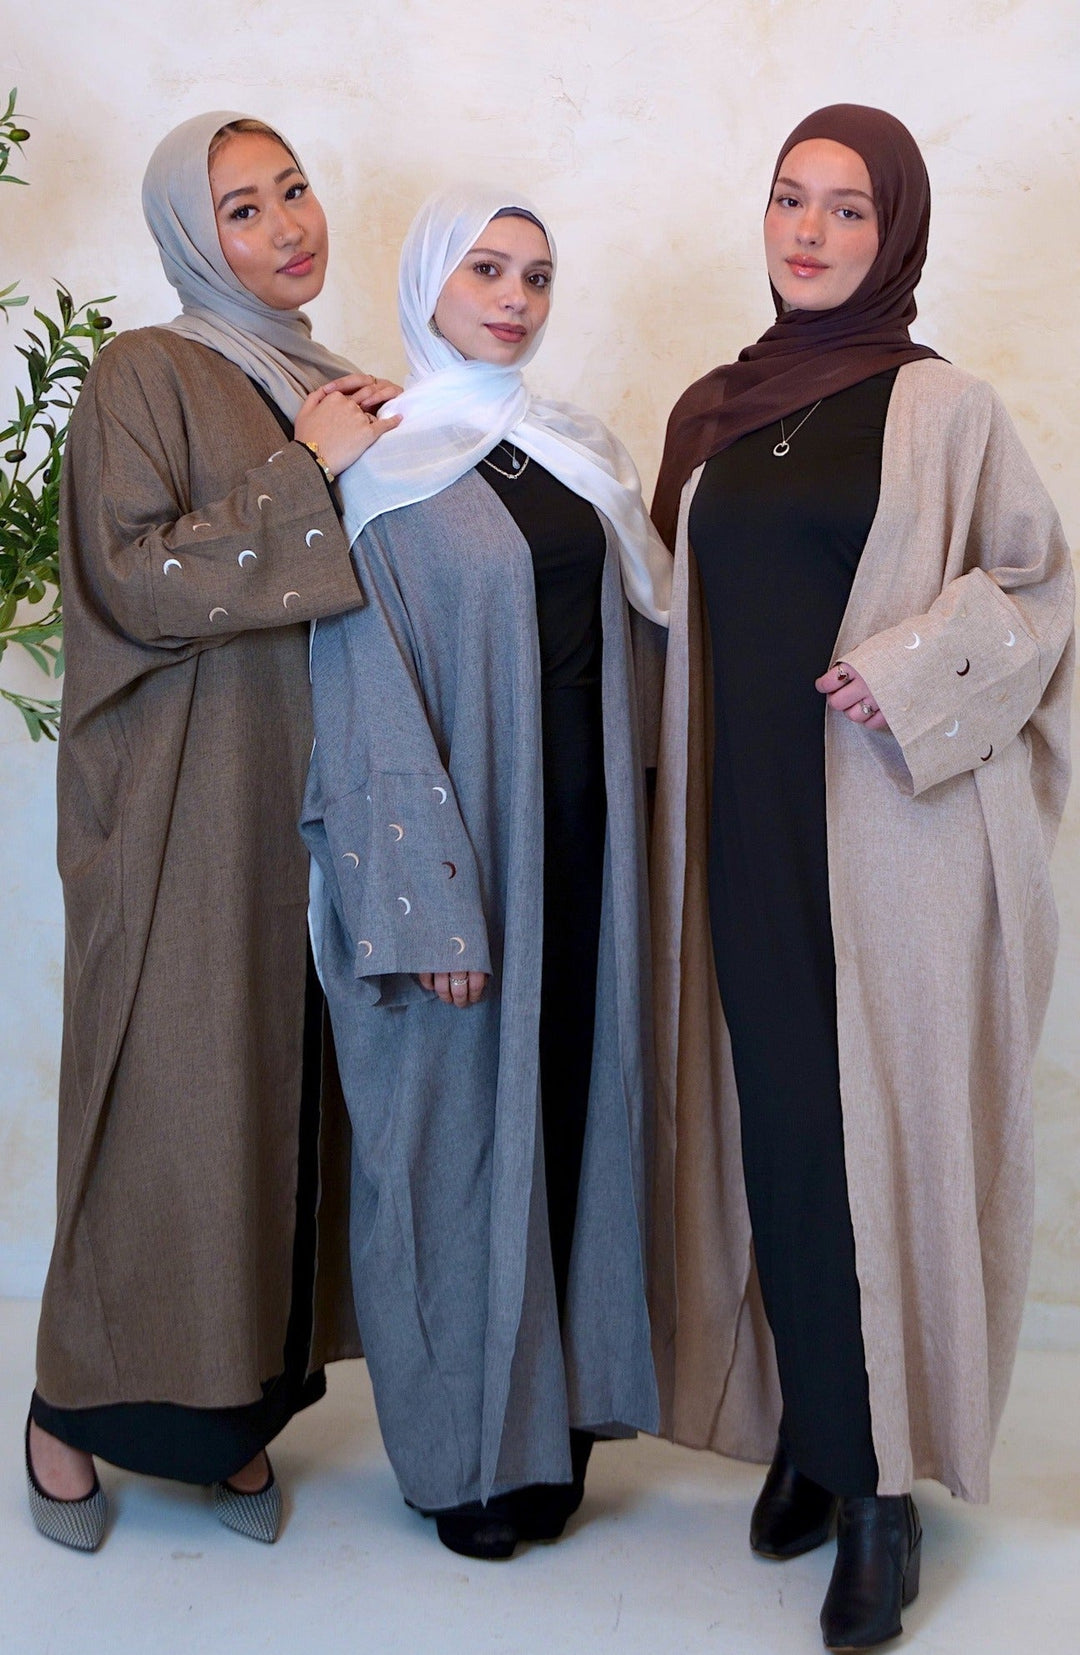 two women standing next to each other wearing hijabs